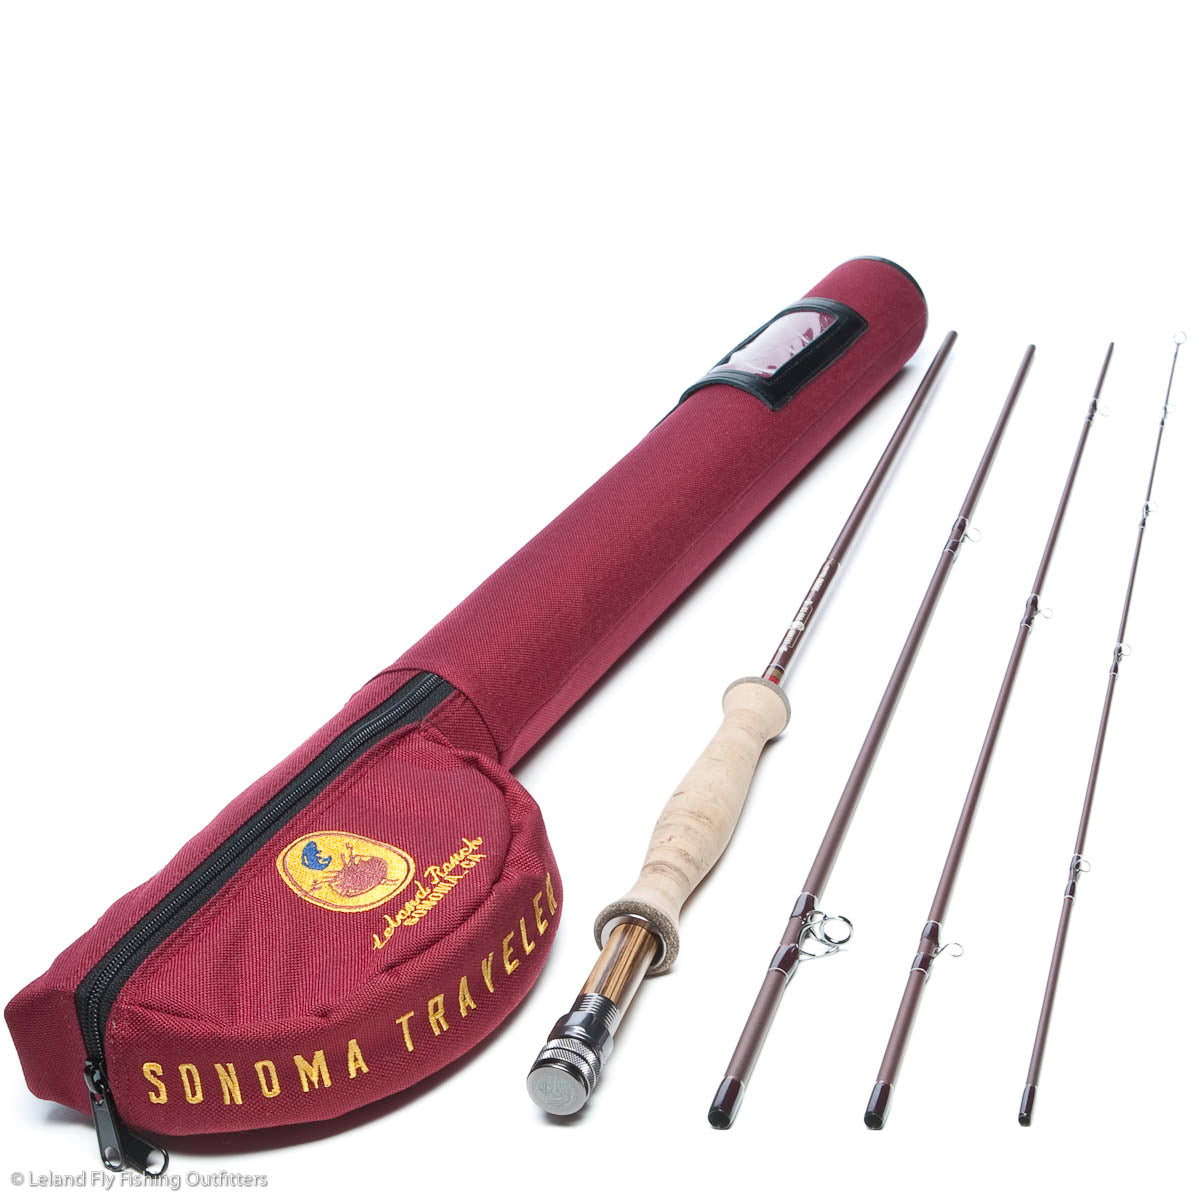 Orvis Clearwater® 6-Piece Fly Rod, Best Economy Travel Fly Rod, For Sale